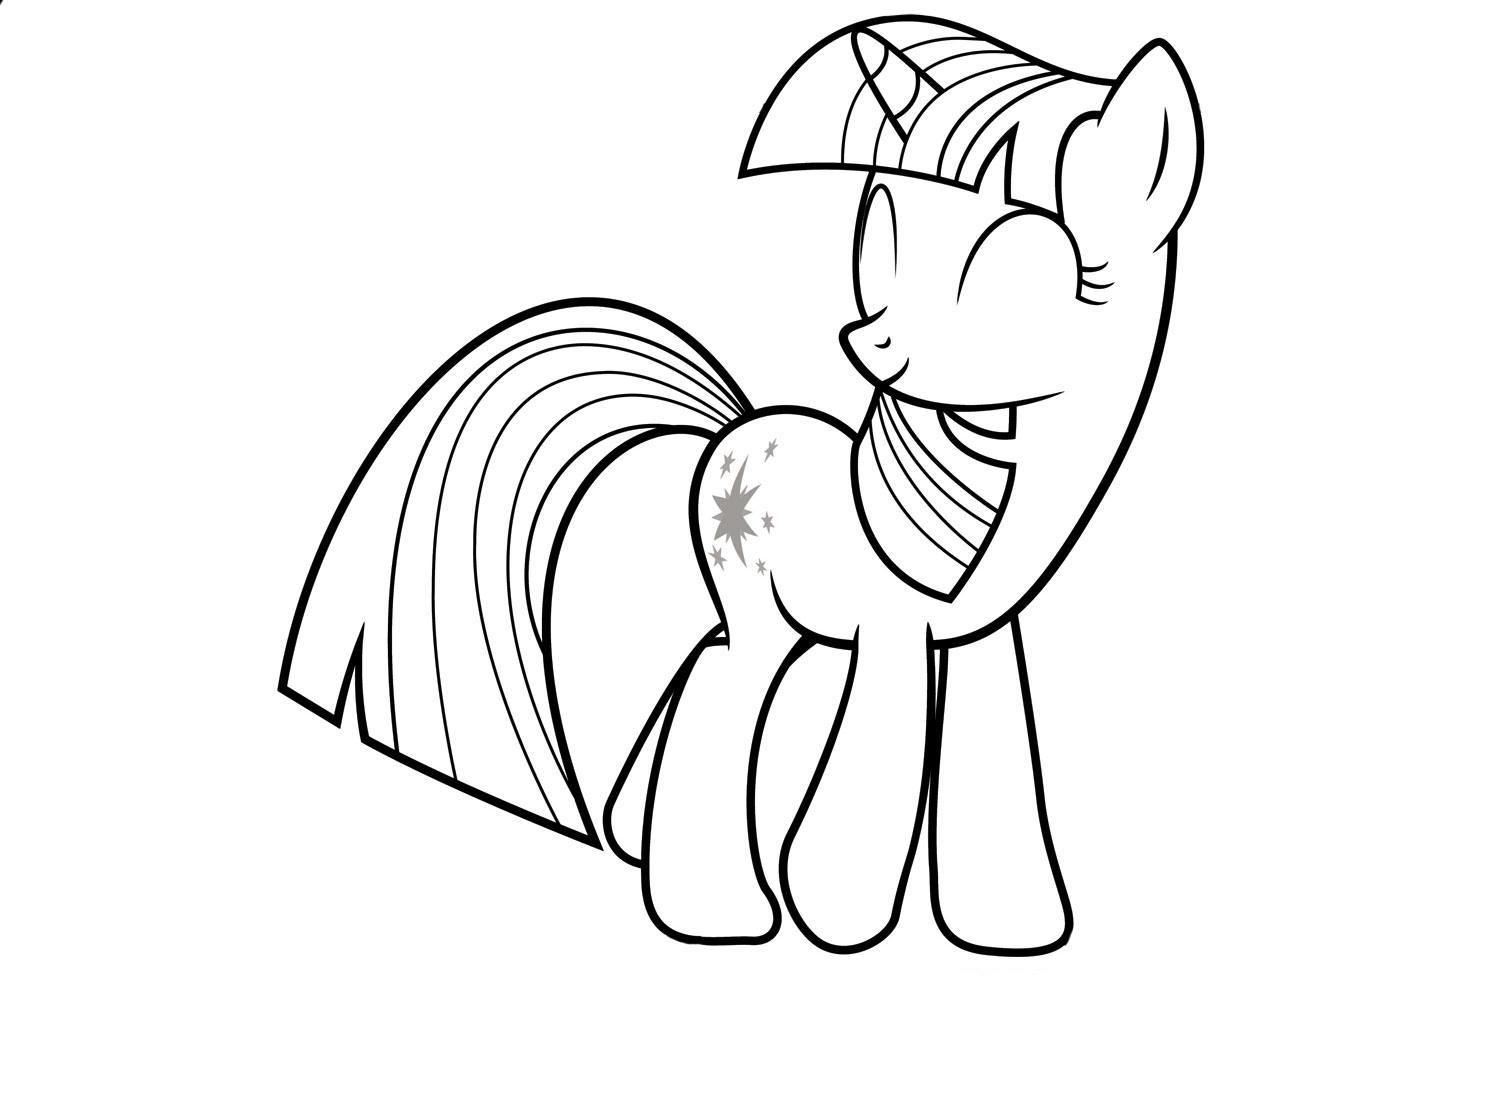 Twilight Sparkle Coloring Pages   Best Coloring Pages For Kids